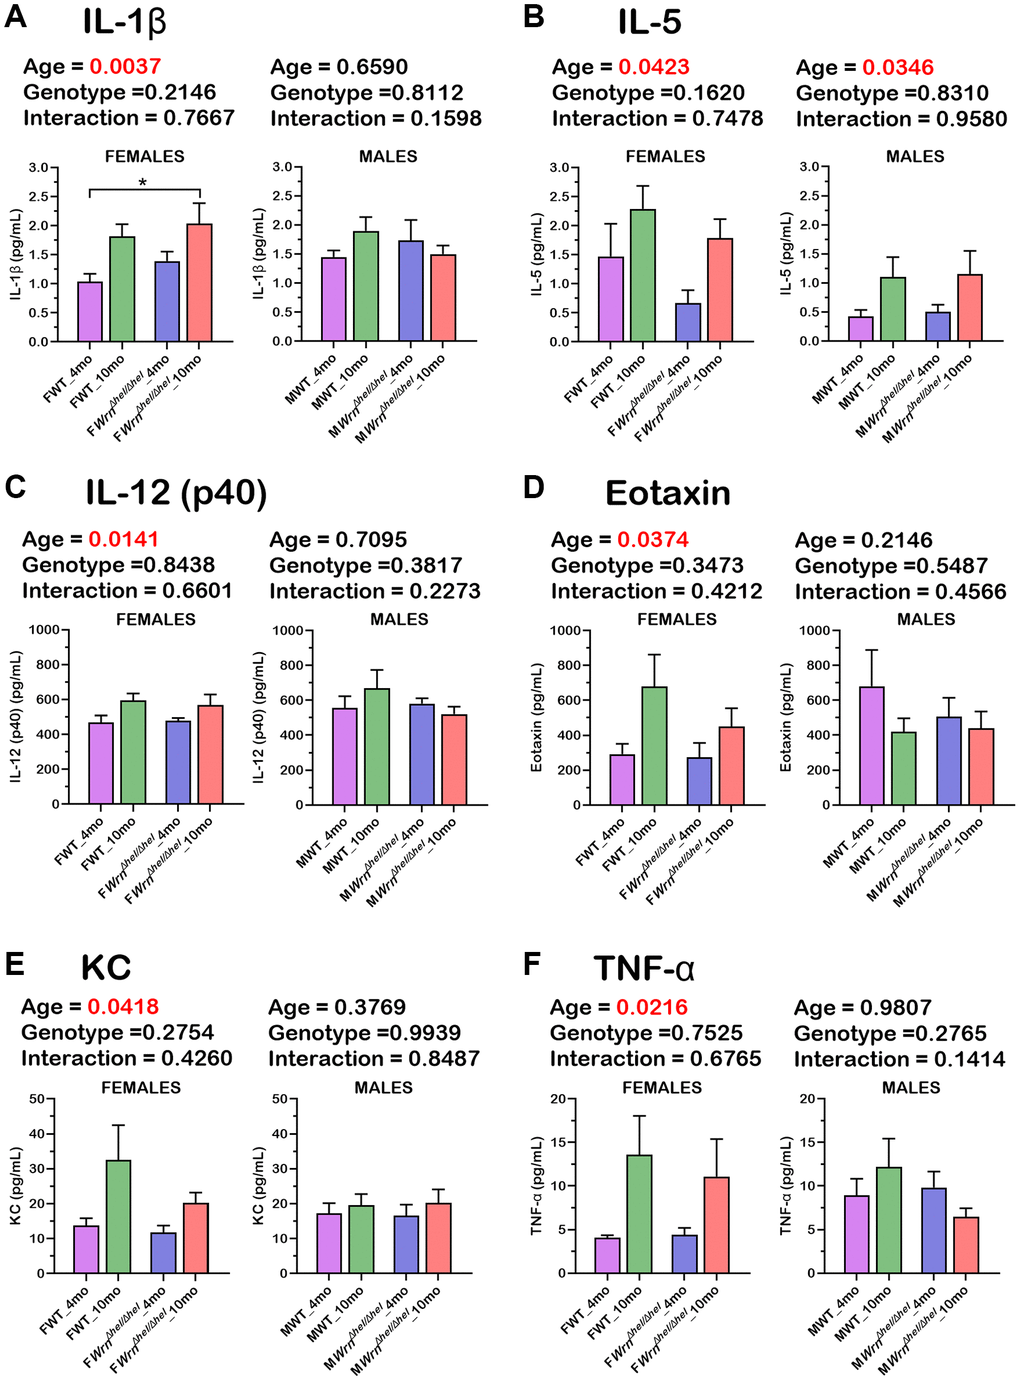 Serum levels of six cytokines significantly altered in the various wild type and WrnΔhel/Δhel female and male groups. (A) IL-1ß. (B) IL-5. (C) IL-12 (p40 subunit). (D) Eotaxin. (E) KC. (F) TNF-α. All the graphs represent the mean of each group. Bars represent the SEM. Two-way ANOVA p-values for age, genotype, and the interaction (age x genotype) are indicated on top of each graph. Two-way ANOVA followed by Tukey’s multiple comparisons test p-value * in the graphs for each comparison. (N = 9–12 males or females per group).